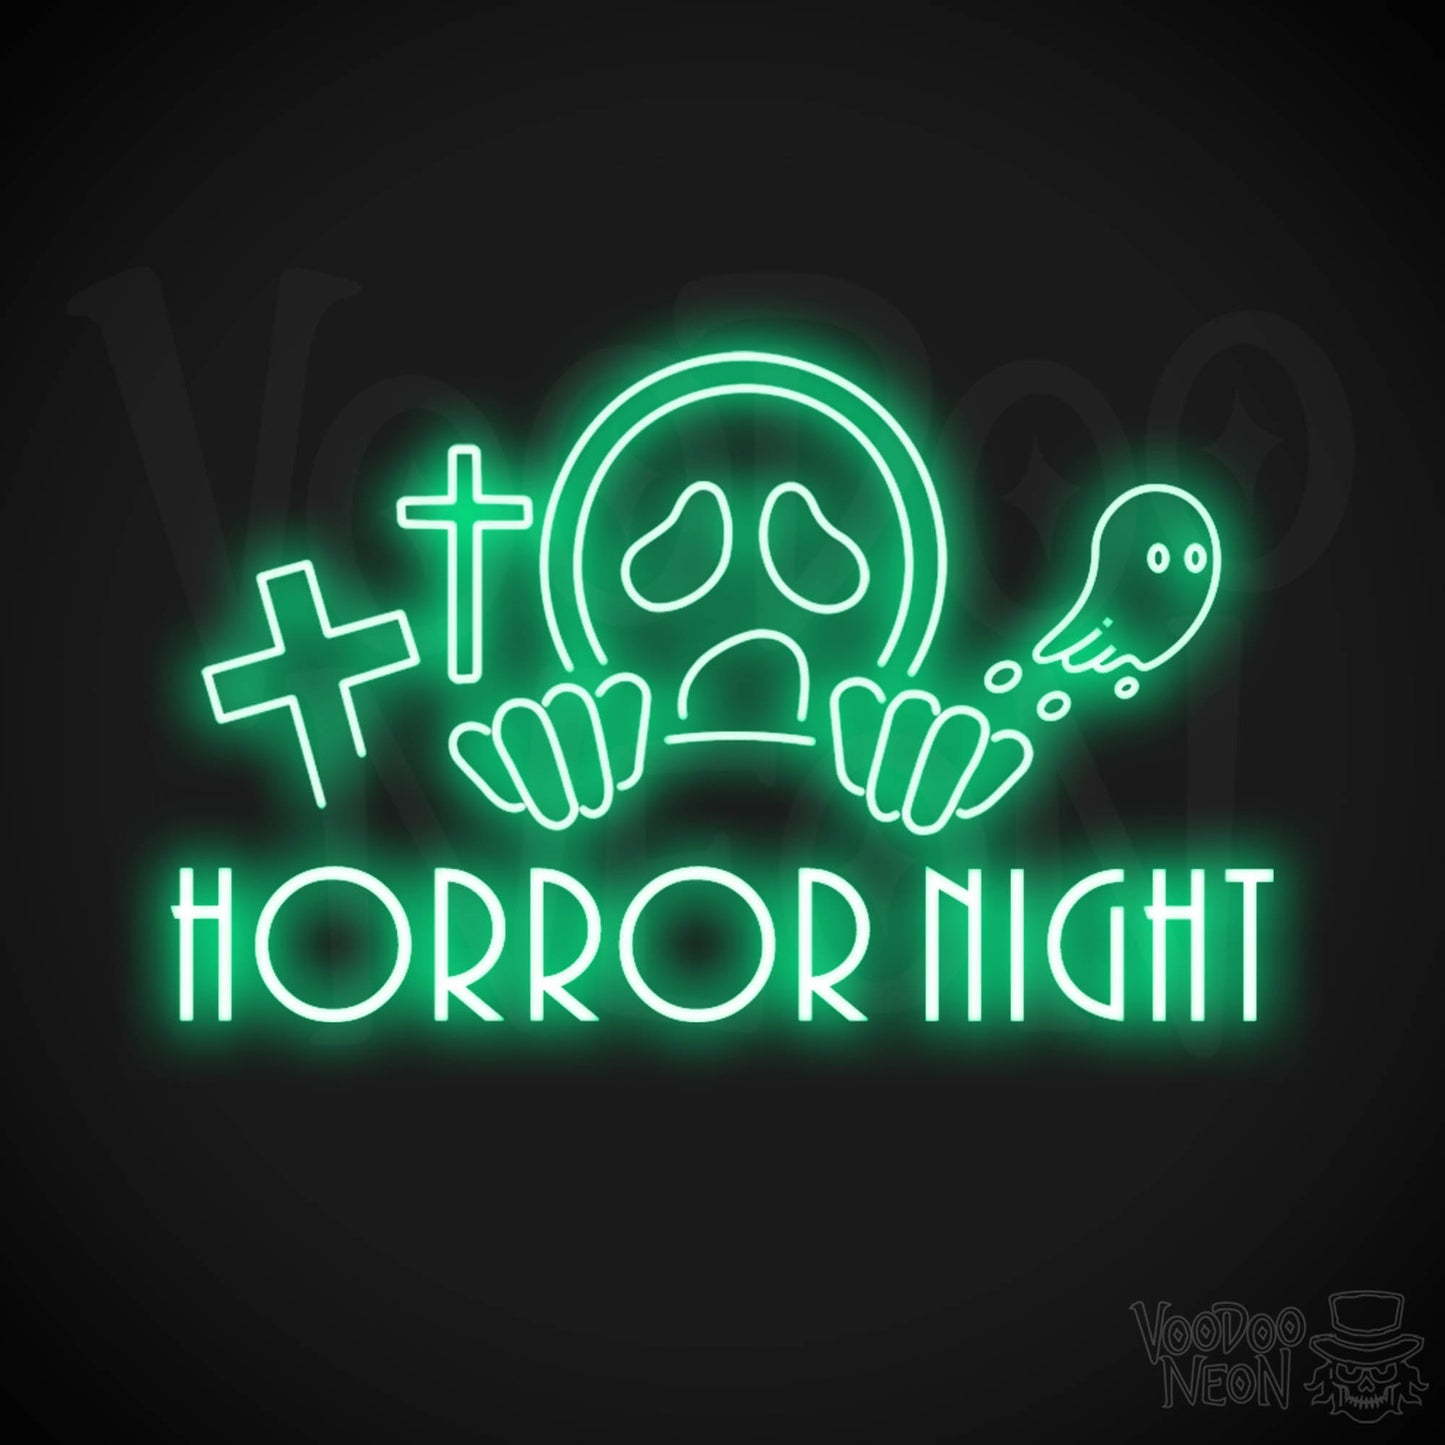 Horror Night Neon Sign - Neon Horror Night Sign - LED Wall Art - Color Green